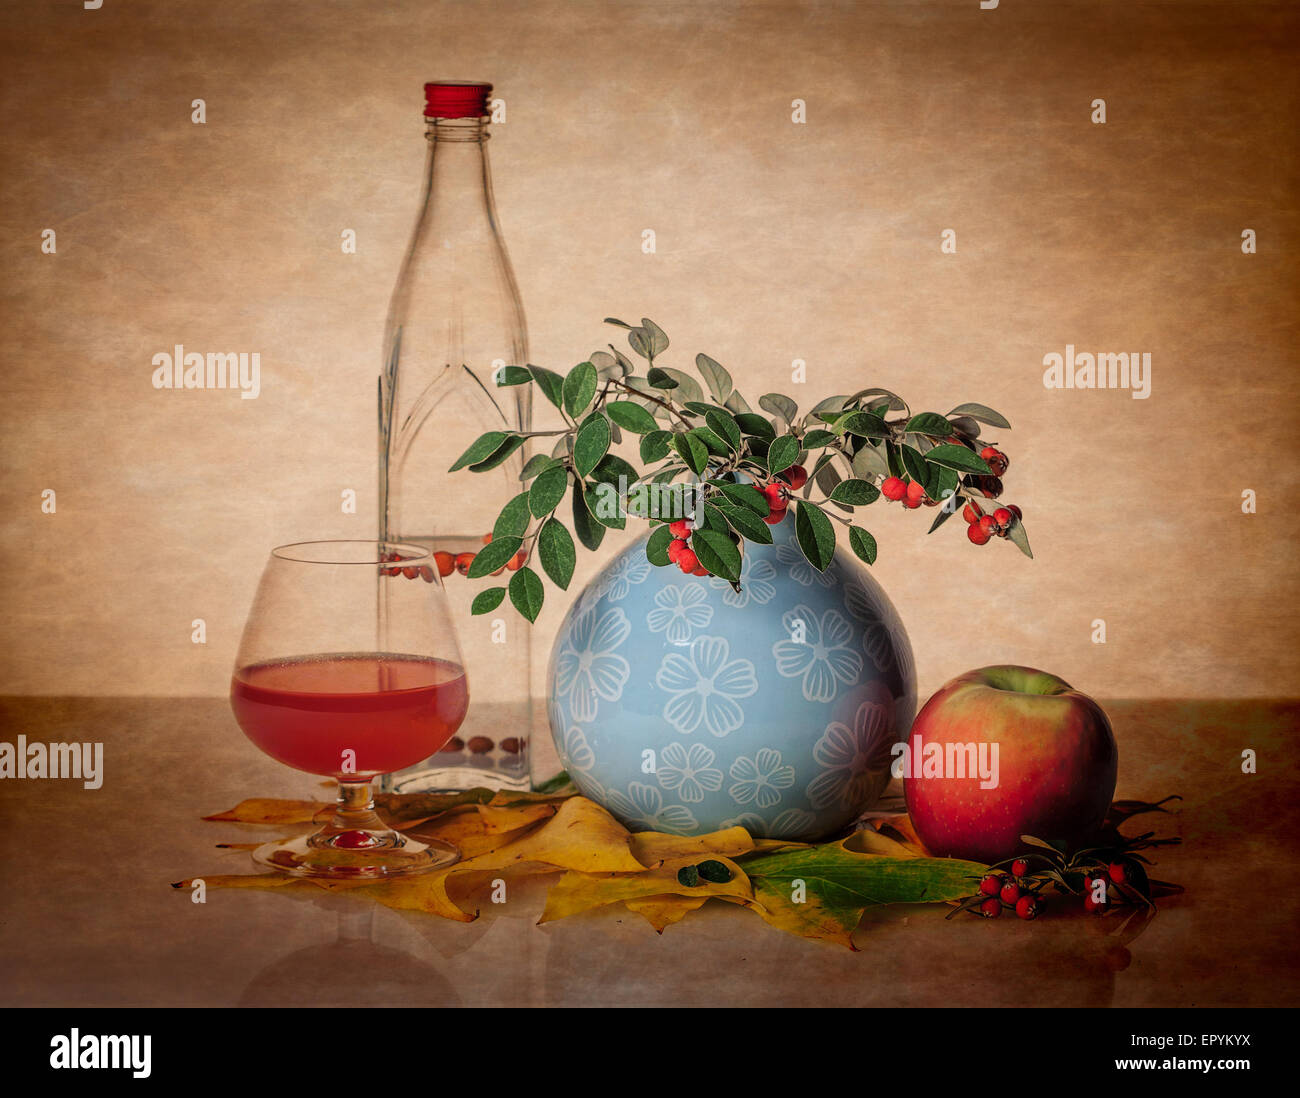 Still life with bottle, glass, and greenery. Stock Photo